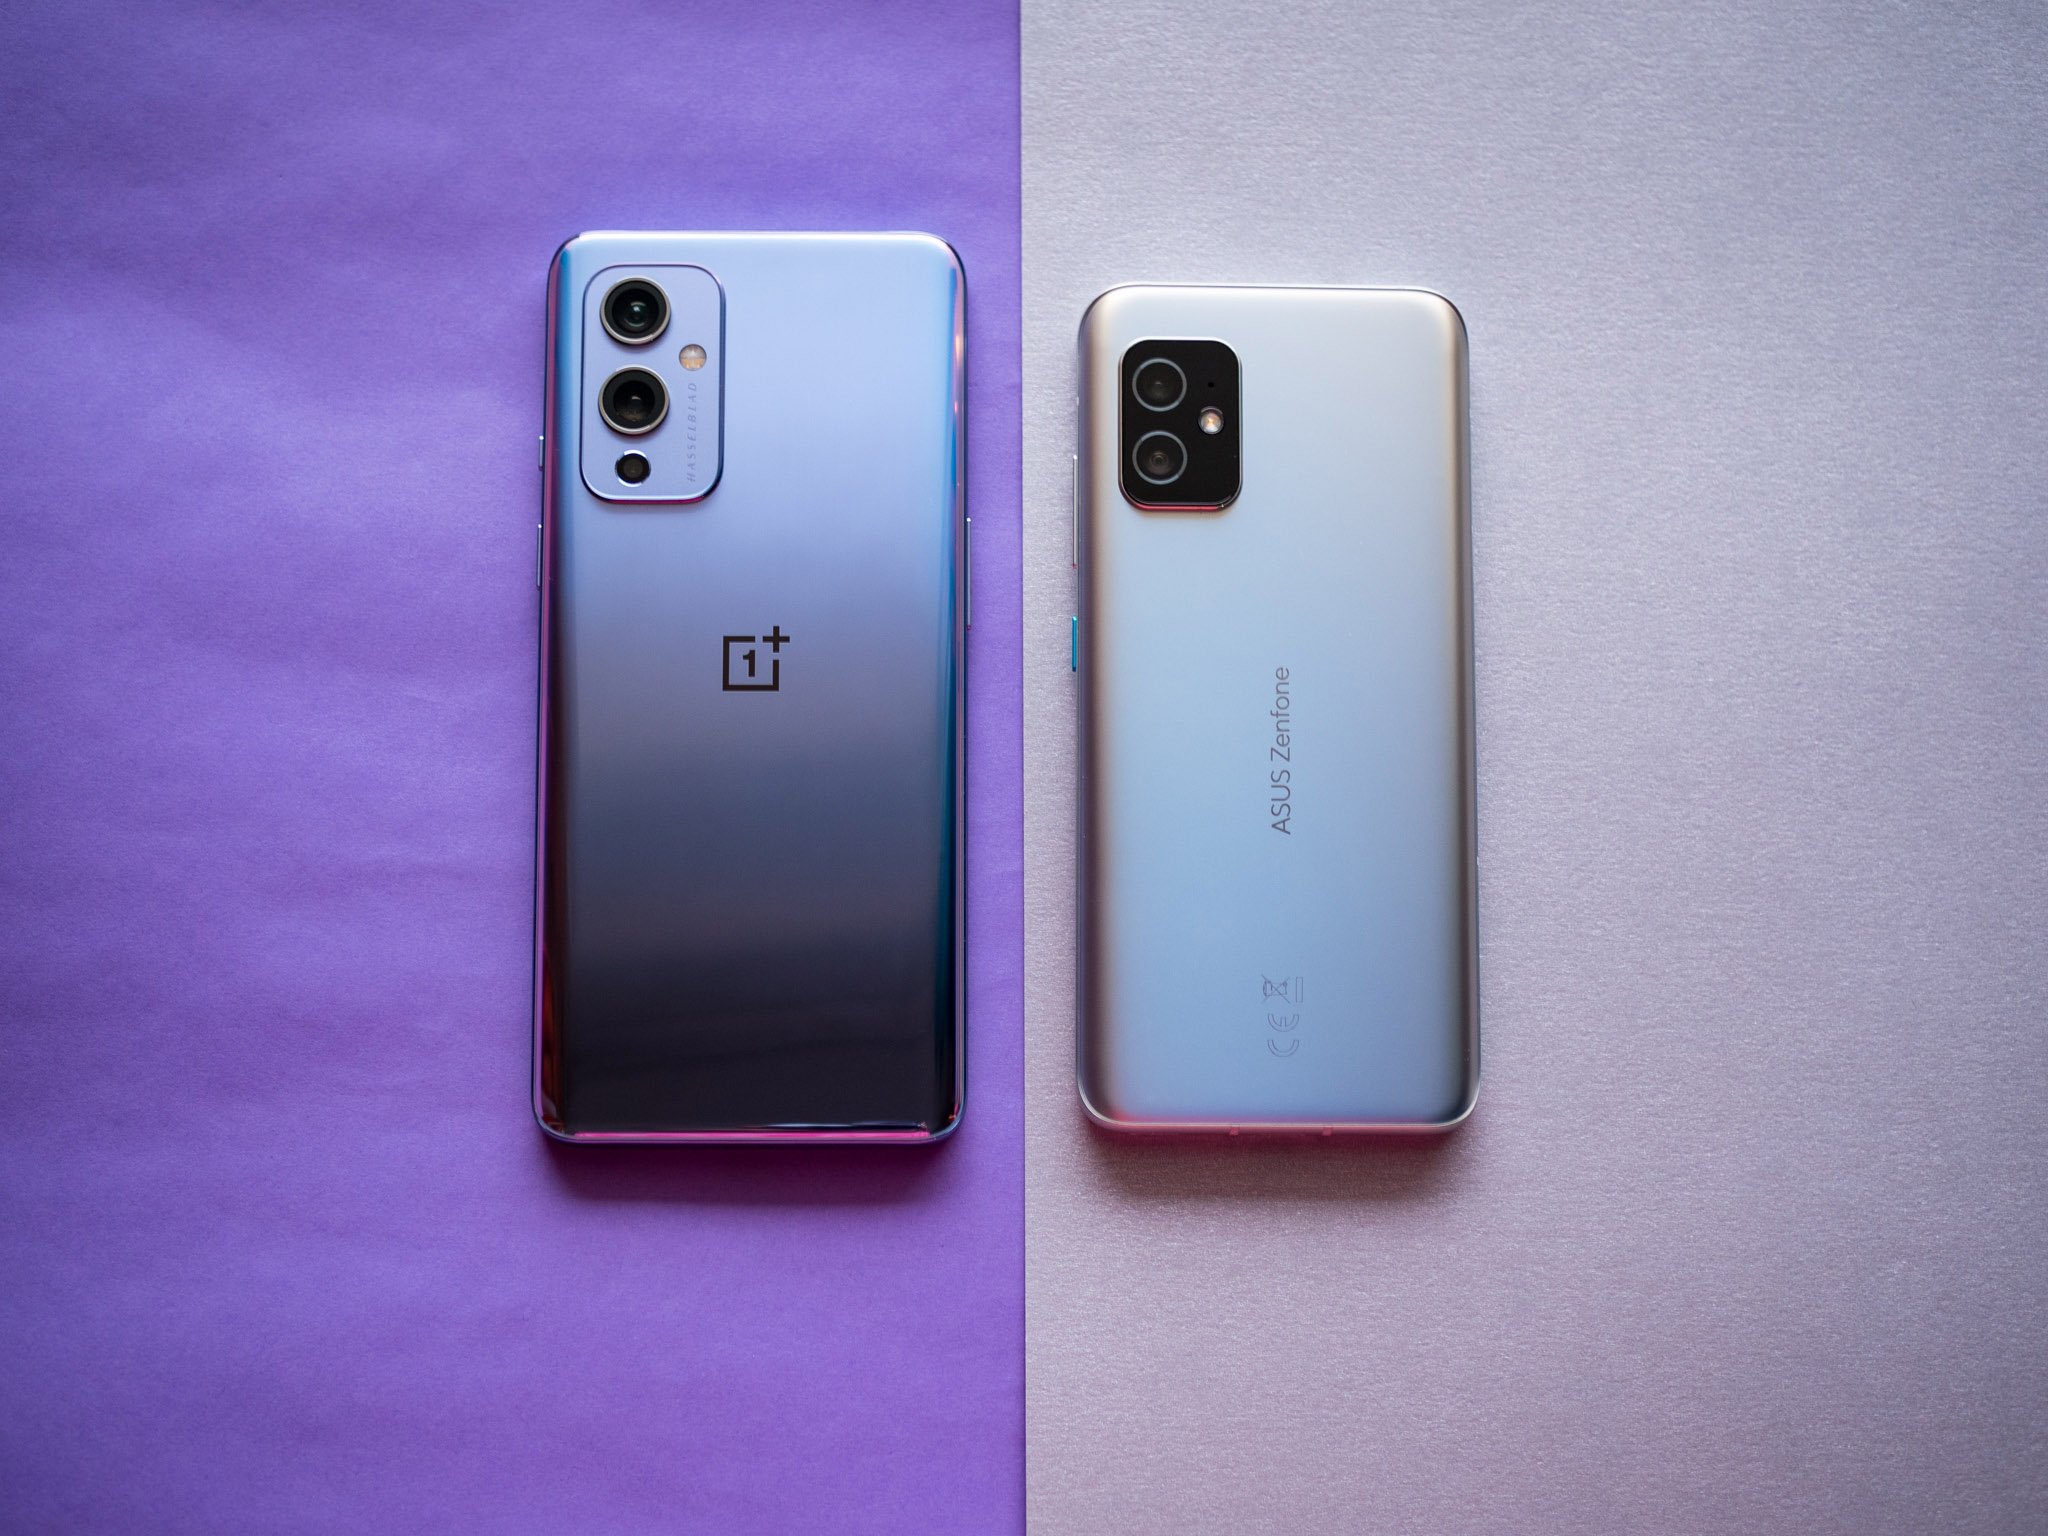 Oneplus 9 Vs Asus Zenfone 8 Which Should You Buy Android Central